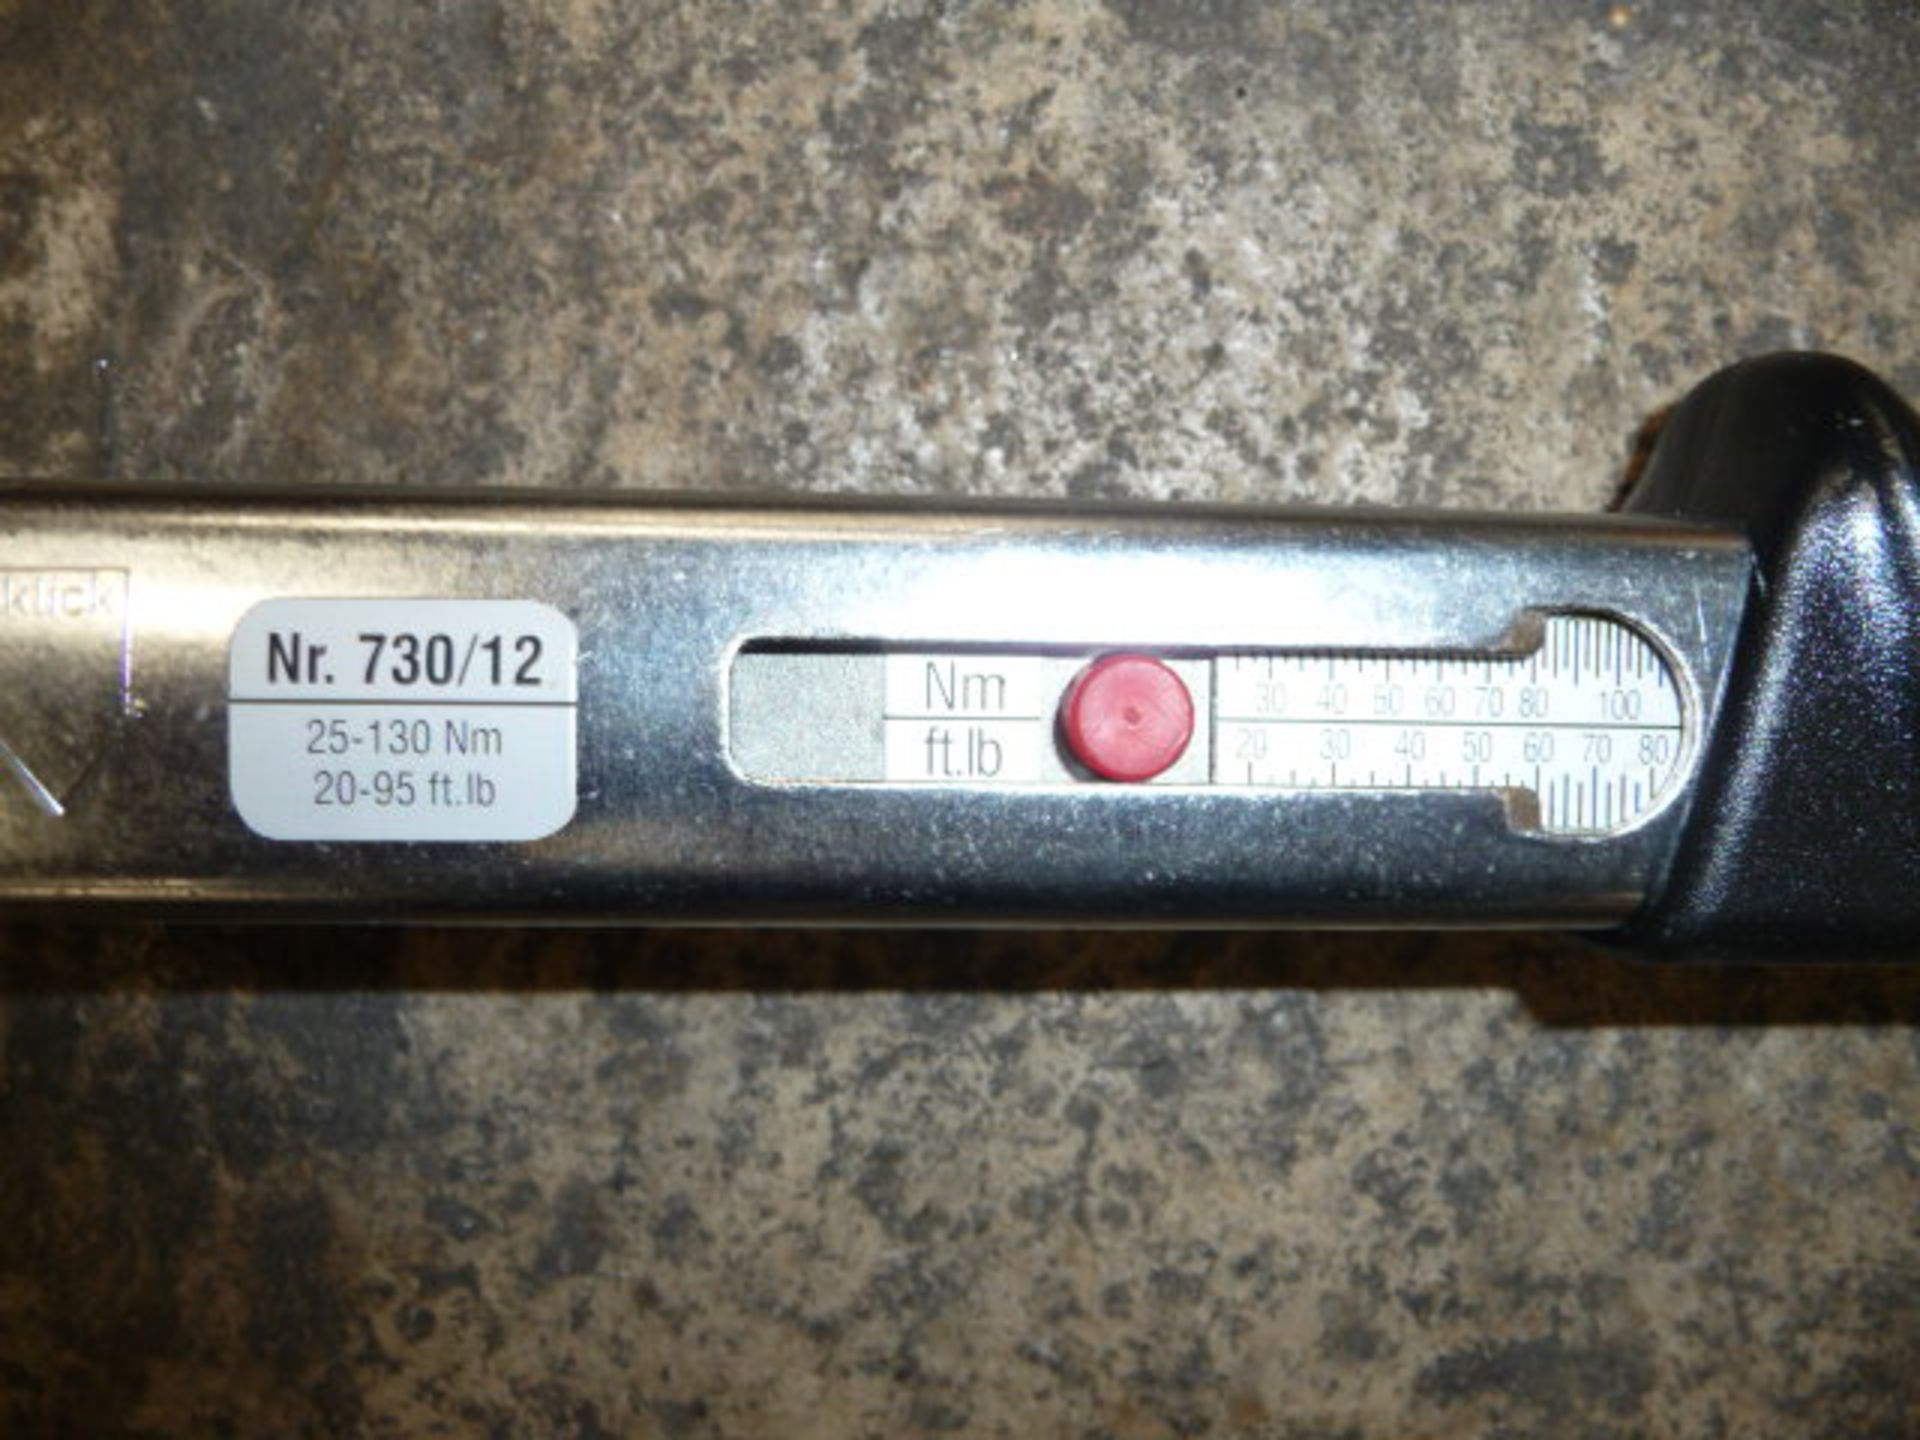 Mercedes-Benz Type Stahlwille Torque Wrench 730R/12 - Image 4 of 8